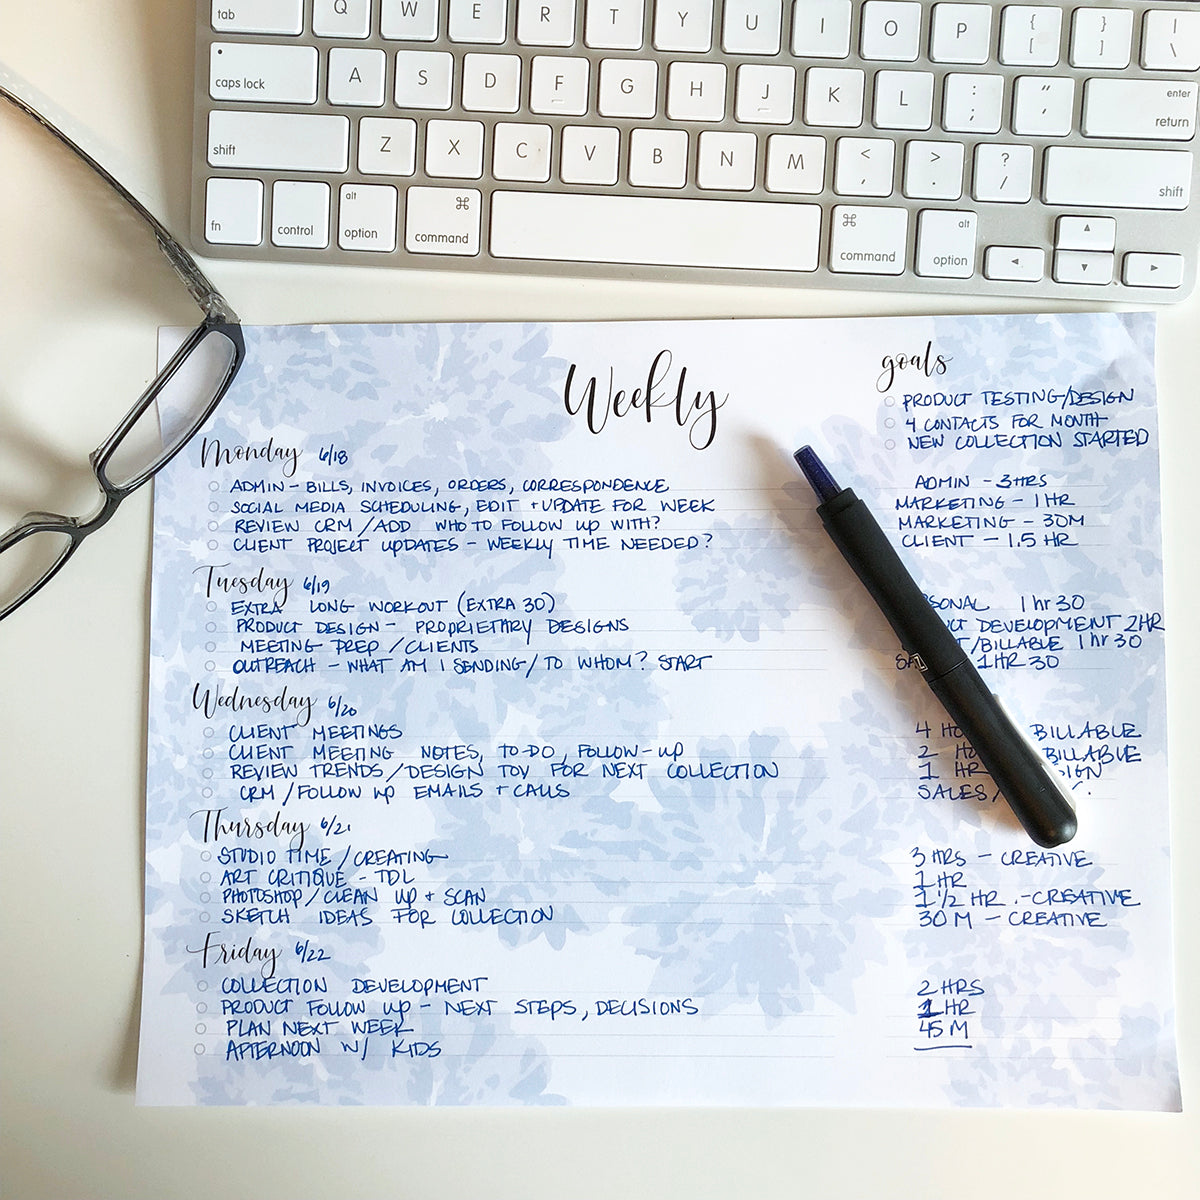 Weekly notepad blue on white example of how to use